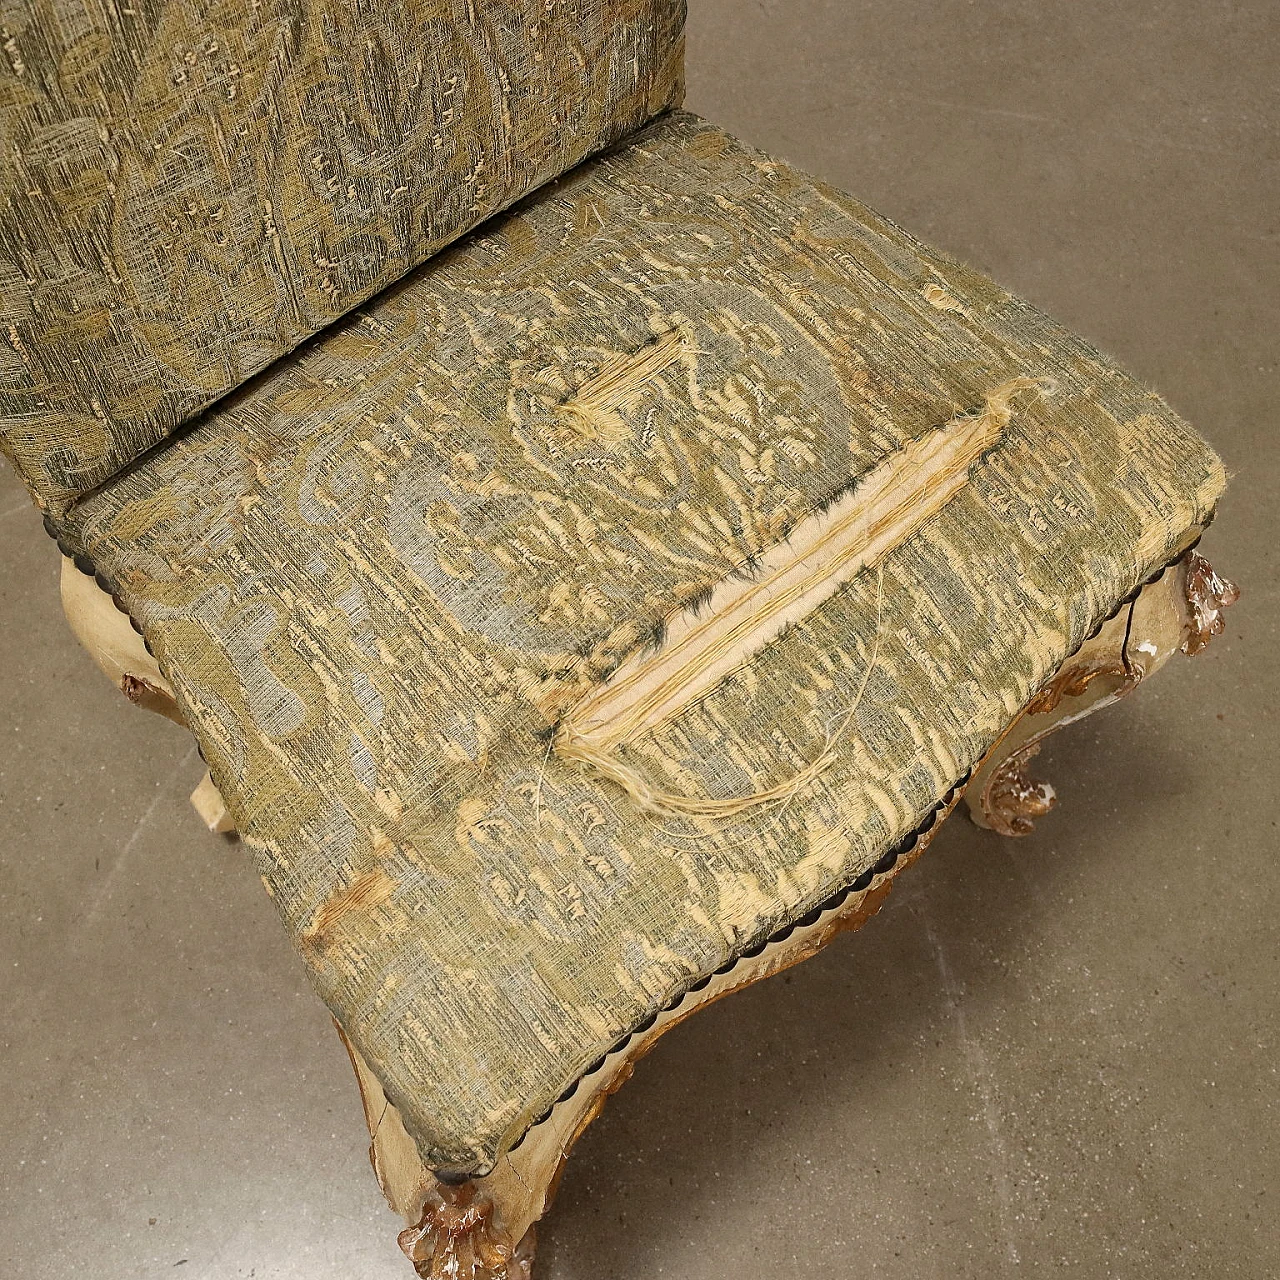 Pair of gilt chairs with leaf motifs & brocade fabric, 19th century 8